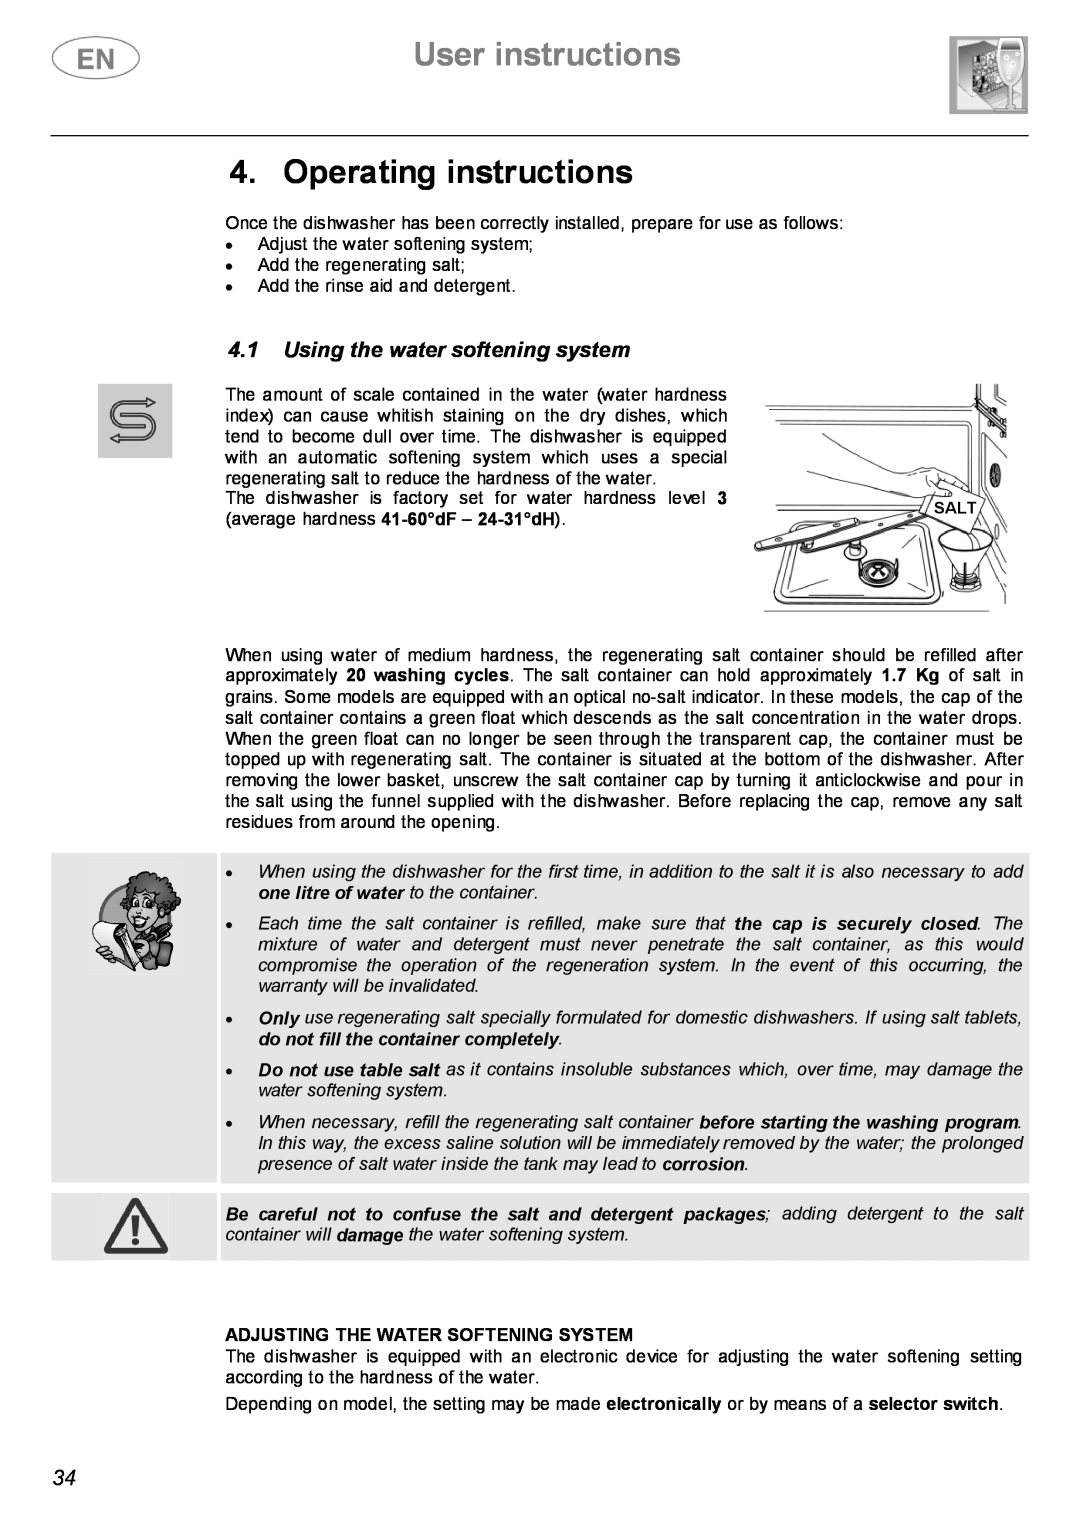 Smeg BL2 Operating instructions, User instructions, Using the water softening system, Adjusting The Water Softening System 